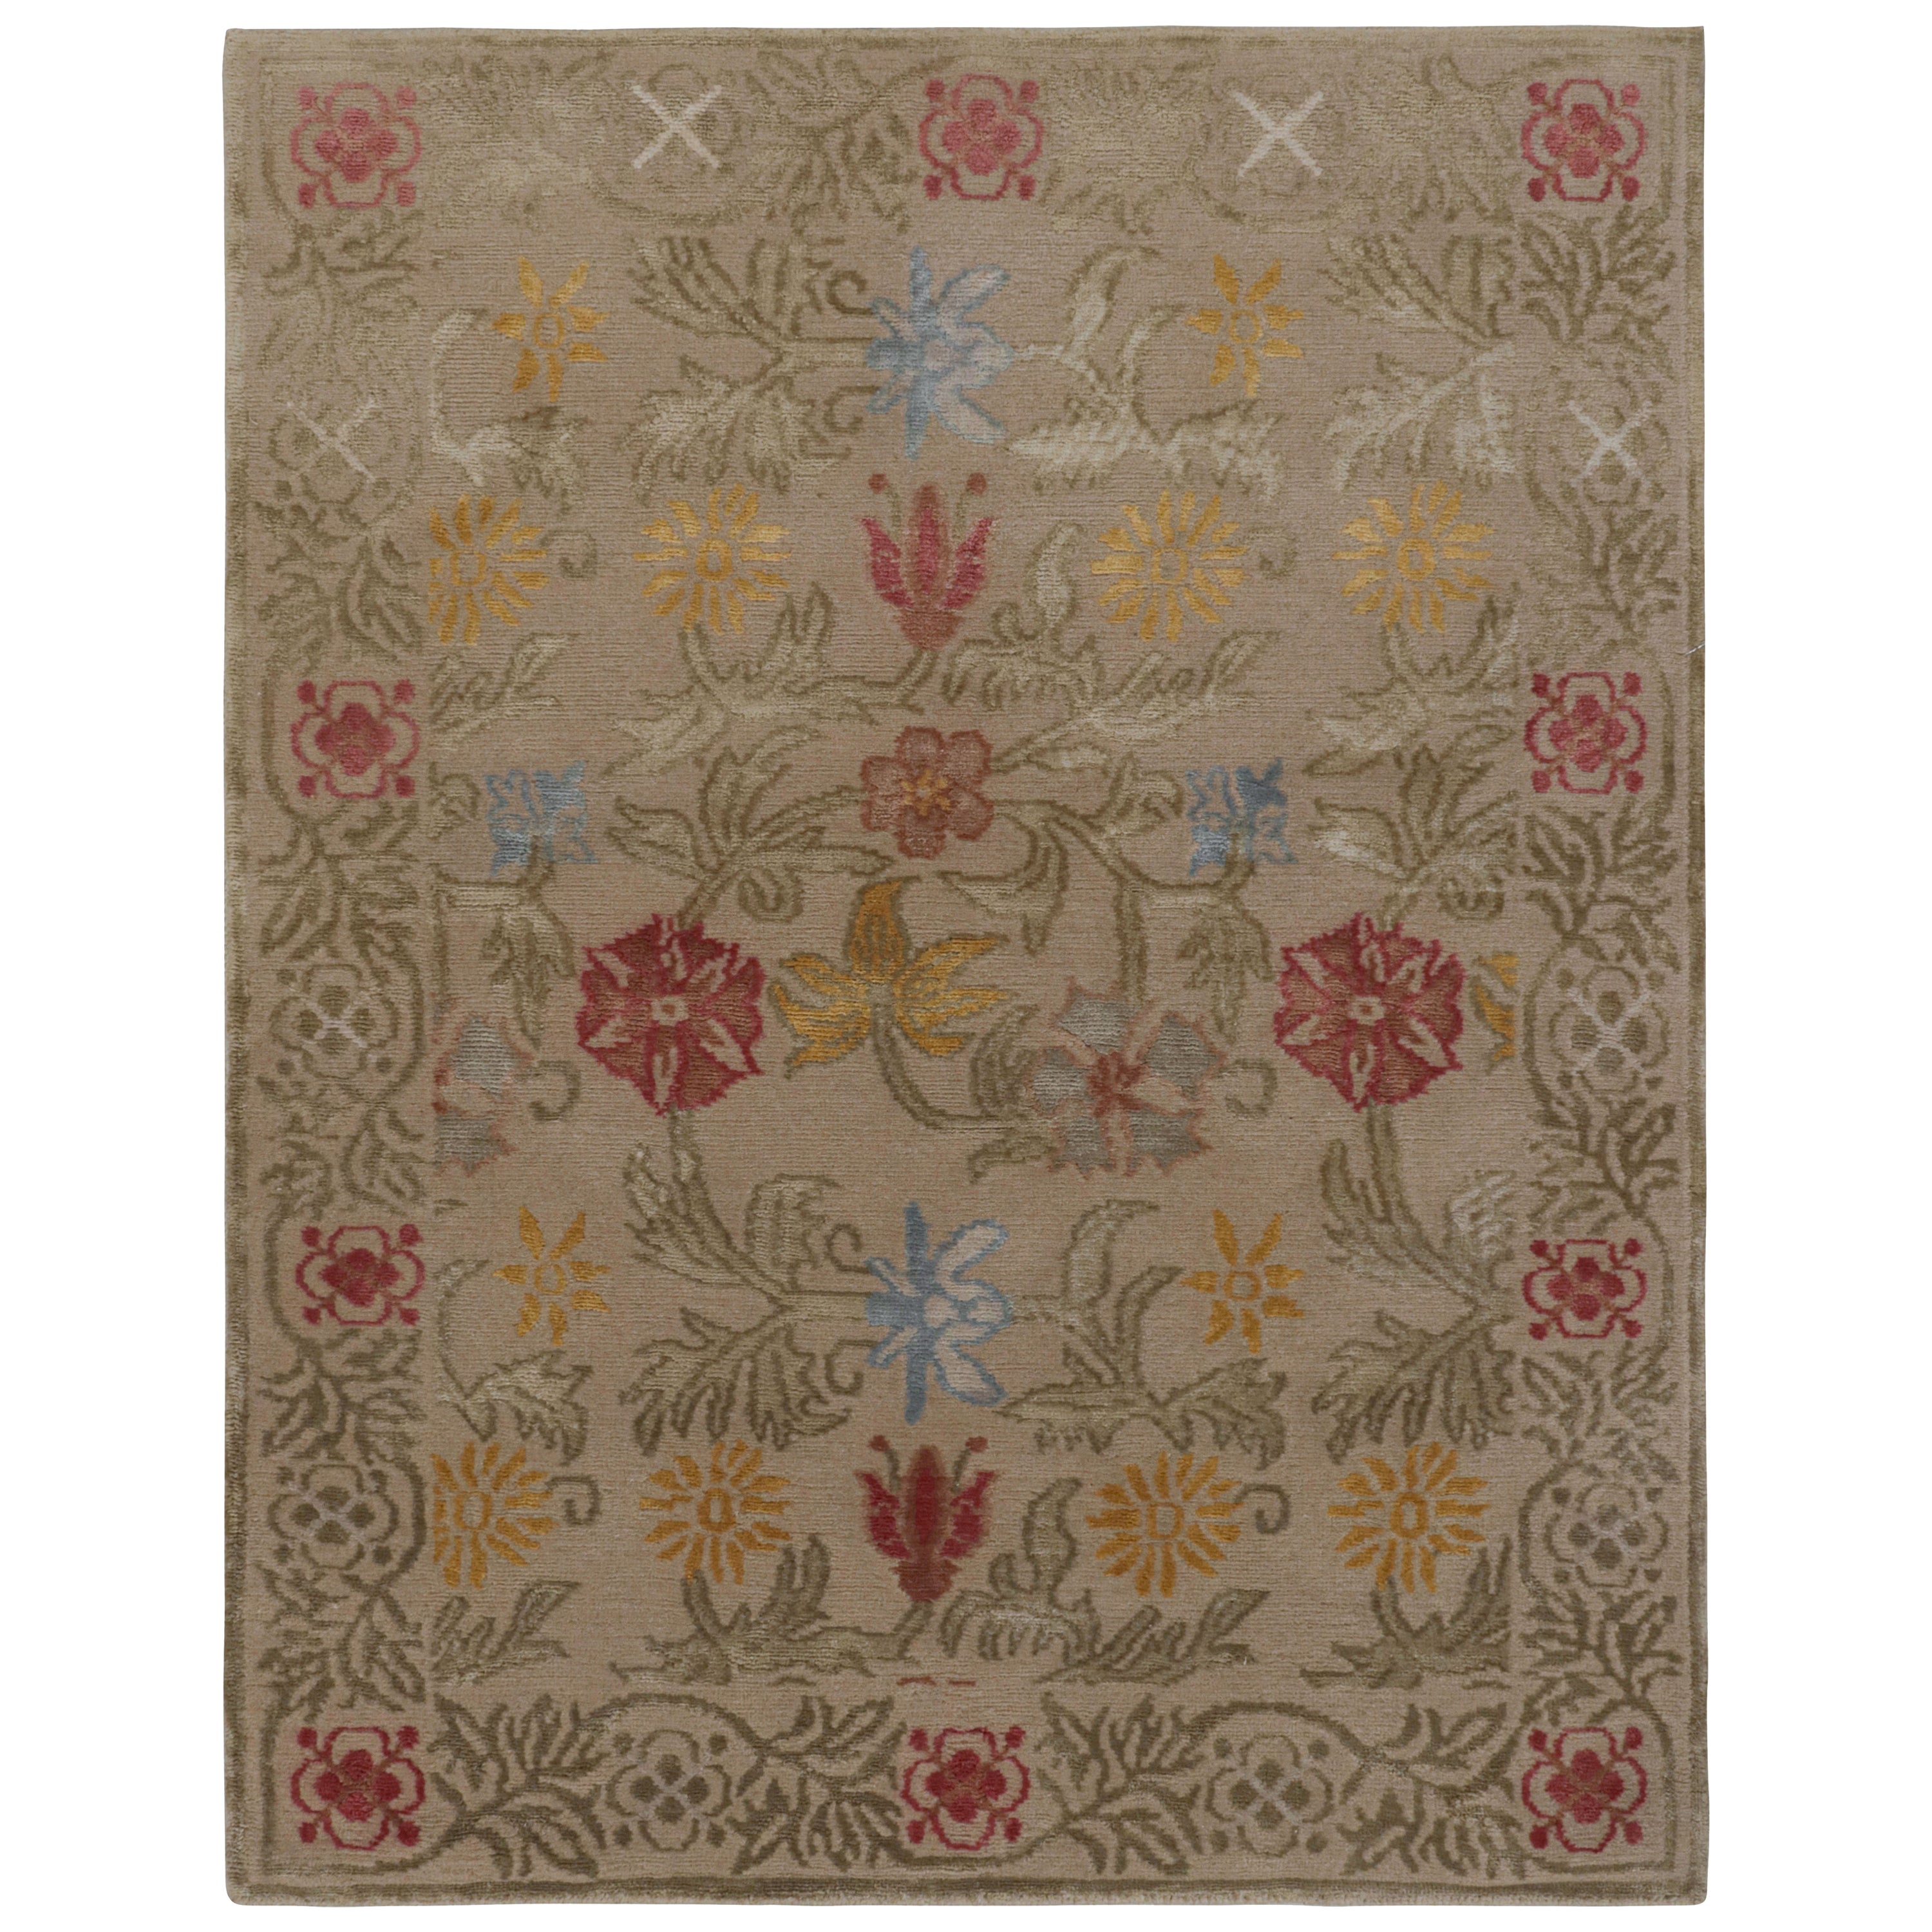 Rug & Kilim’s Spanish European Style Rug in Beige with Floral Patterns “Bilbao” For Sale